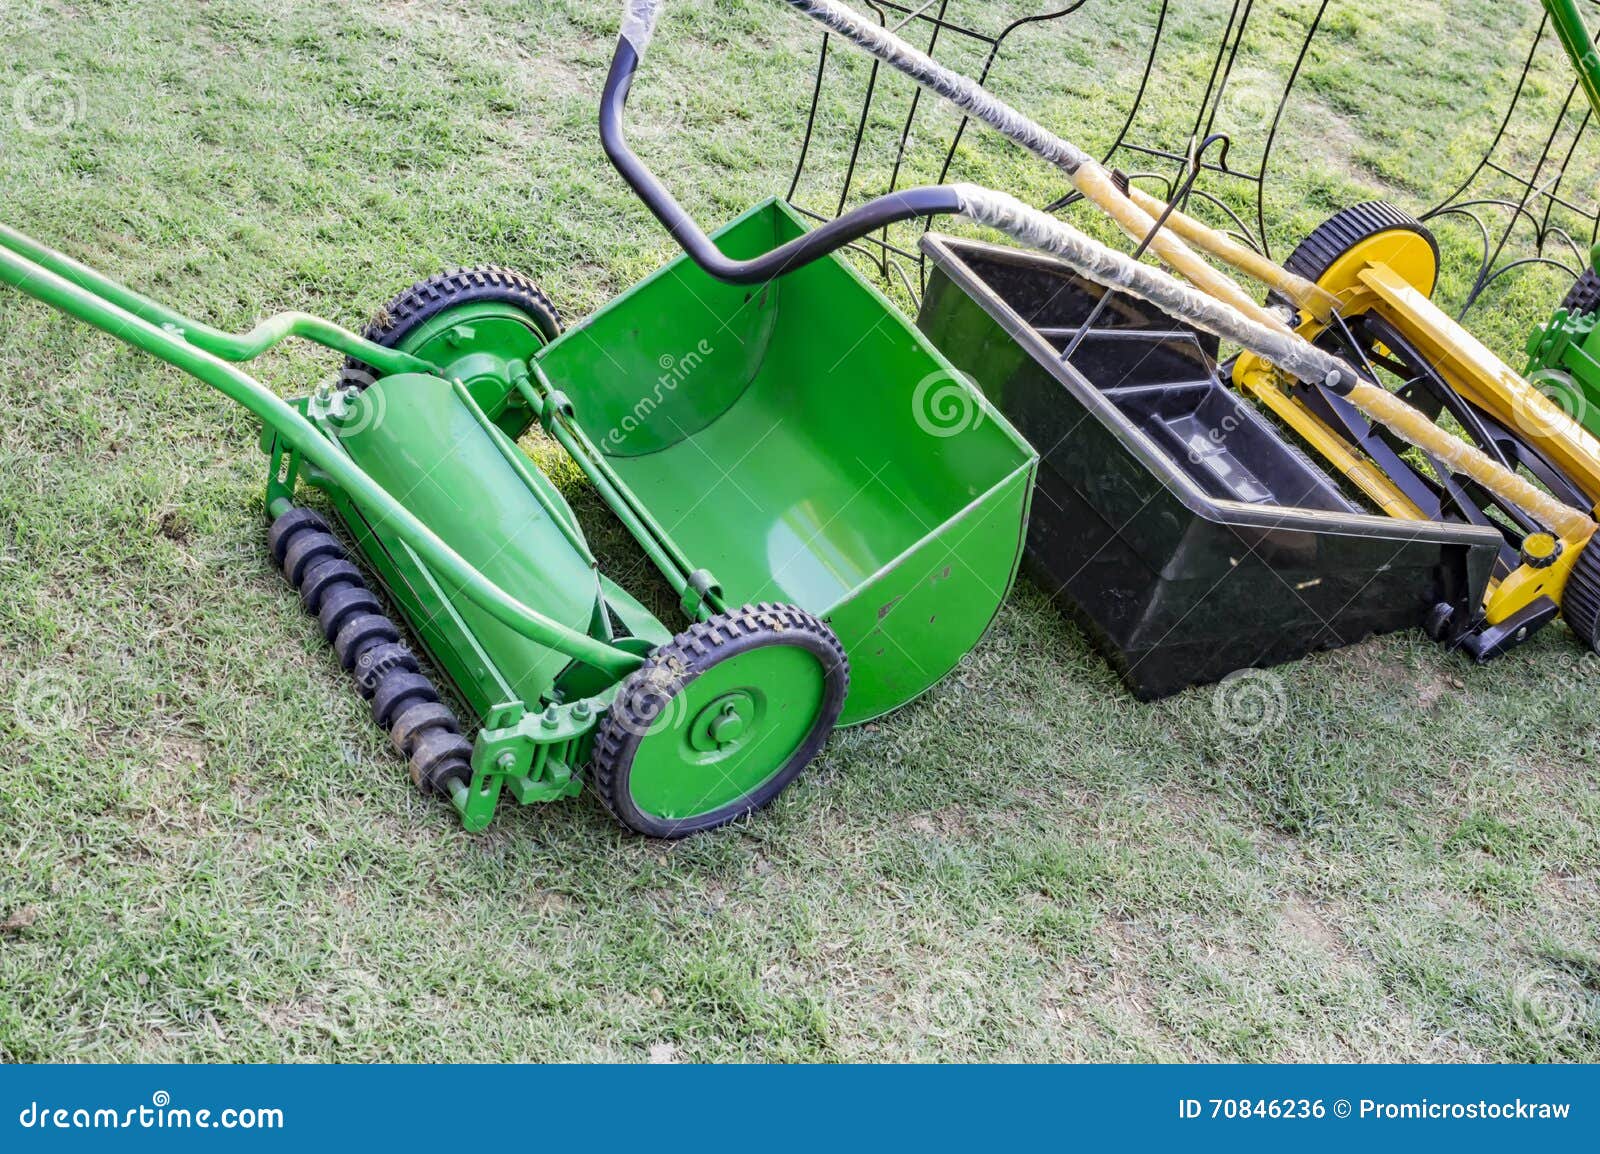 Mechanical lawn mower stock photo. Image of trimming 70846236